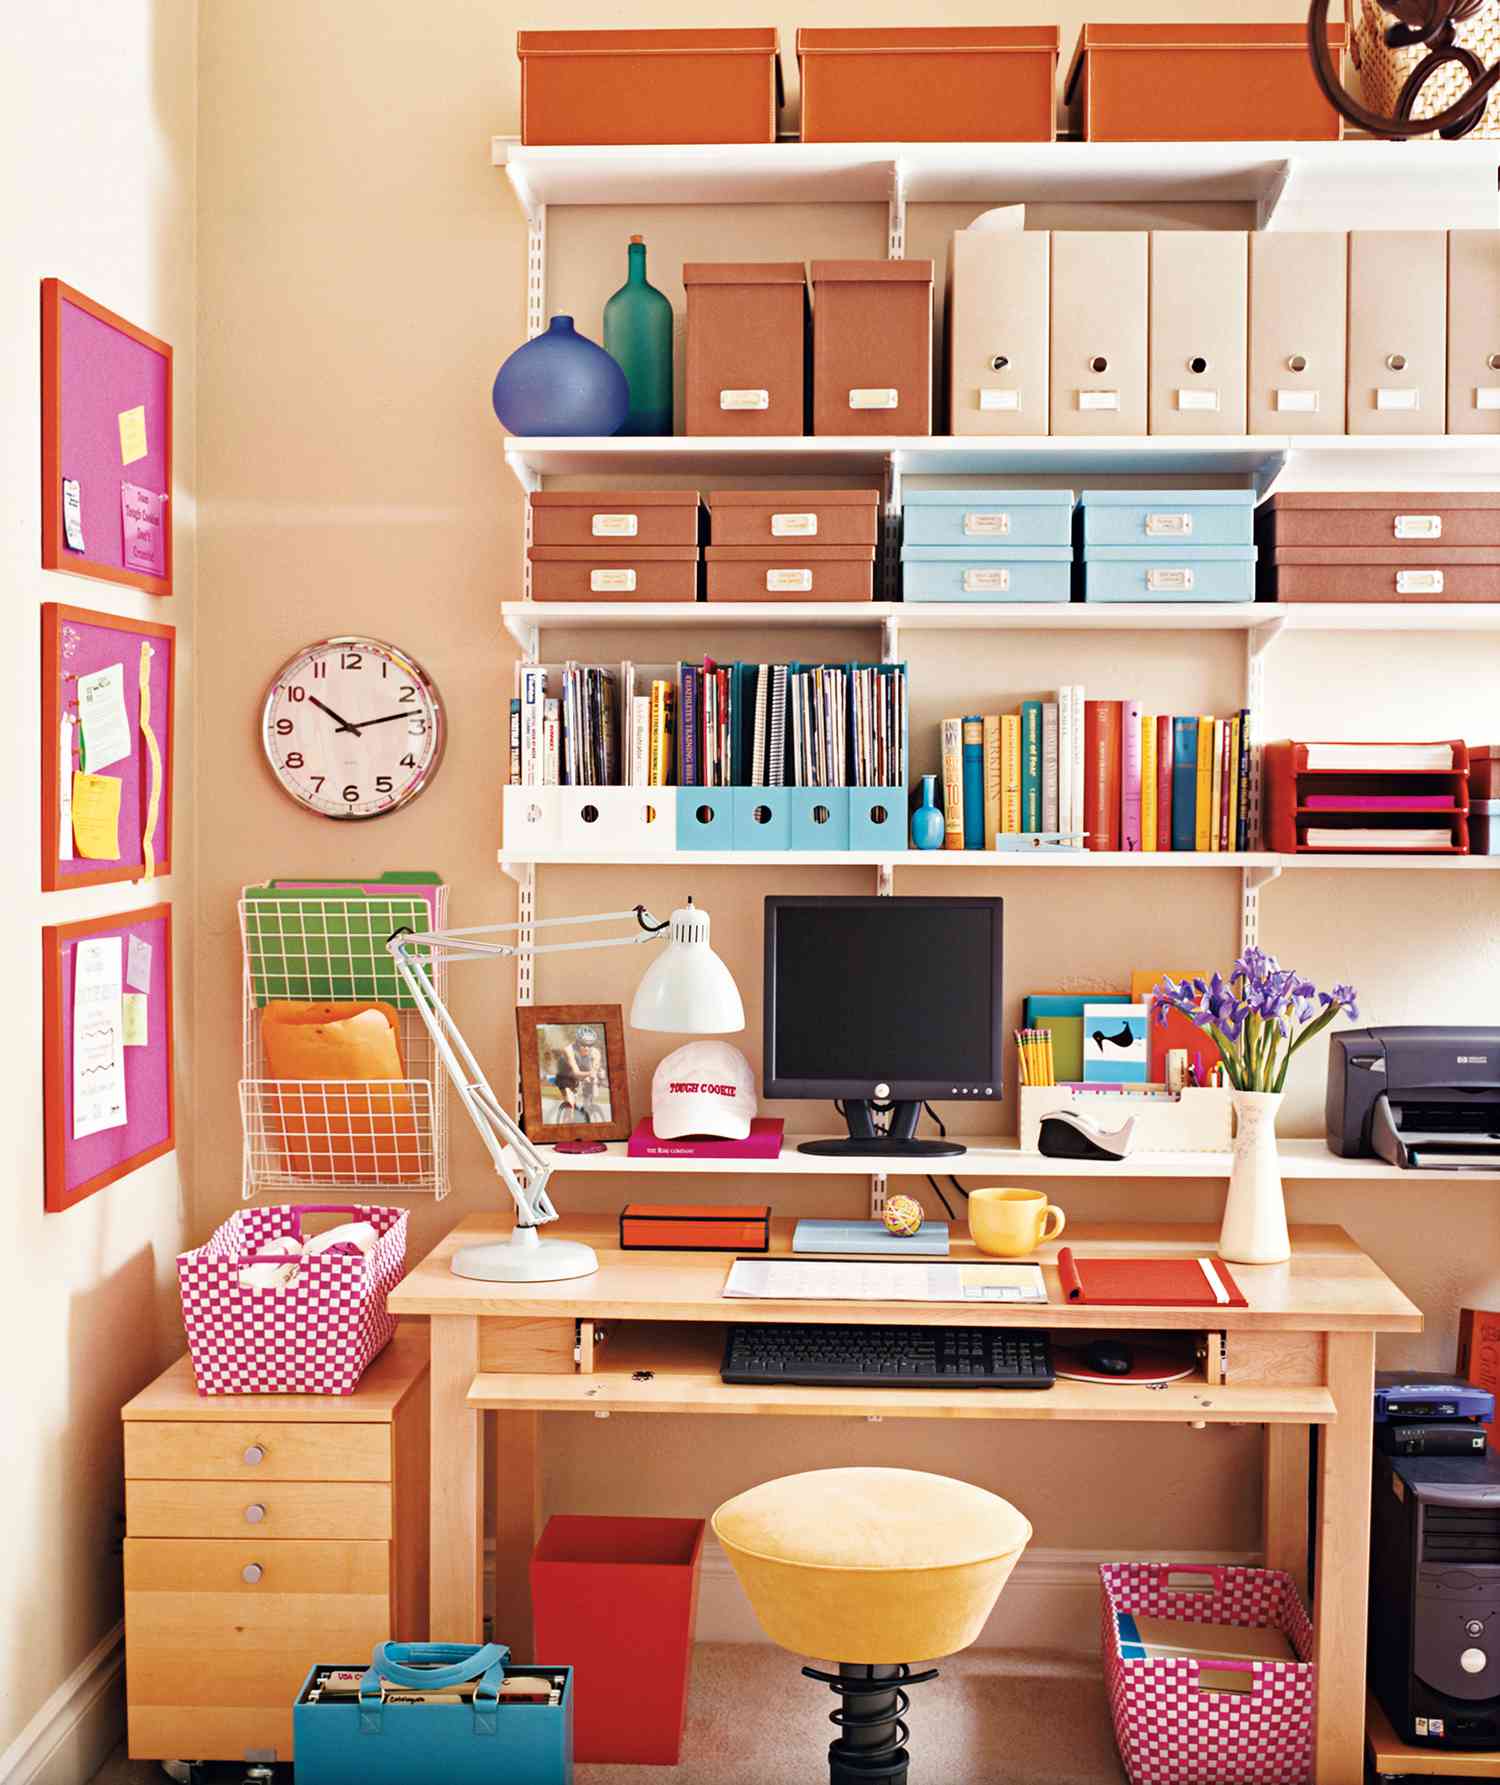 21 Ideas For An Organized Home Office Real Simple,Bedroom Ceiling Fans With Lights And Remote